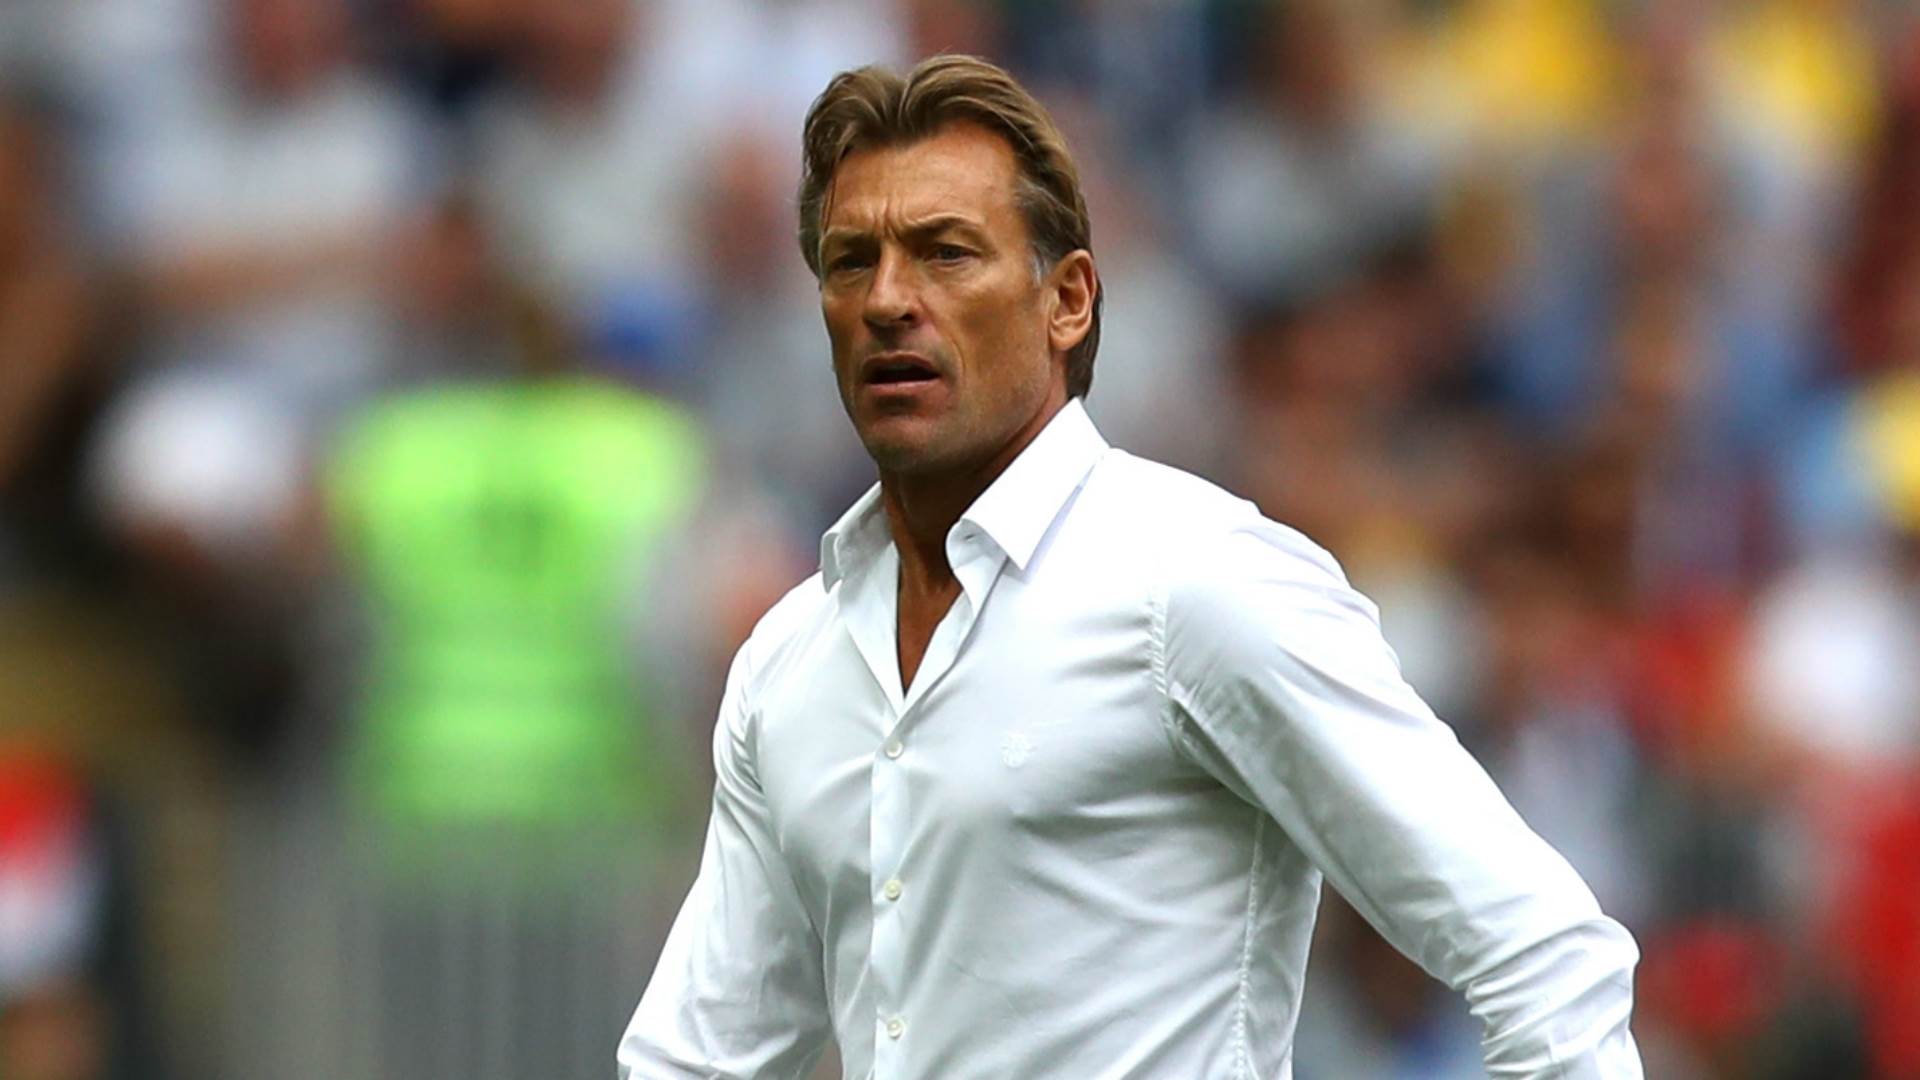 Former Morocco manager Herve Renard has confirmed his decision to leave the France women's team, which has reportedly sparked interest from Nigeria.